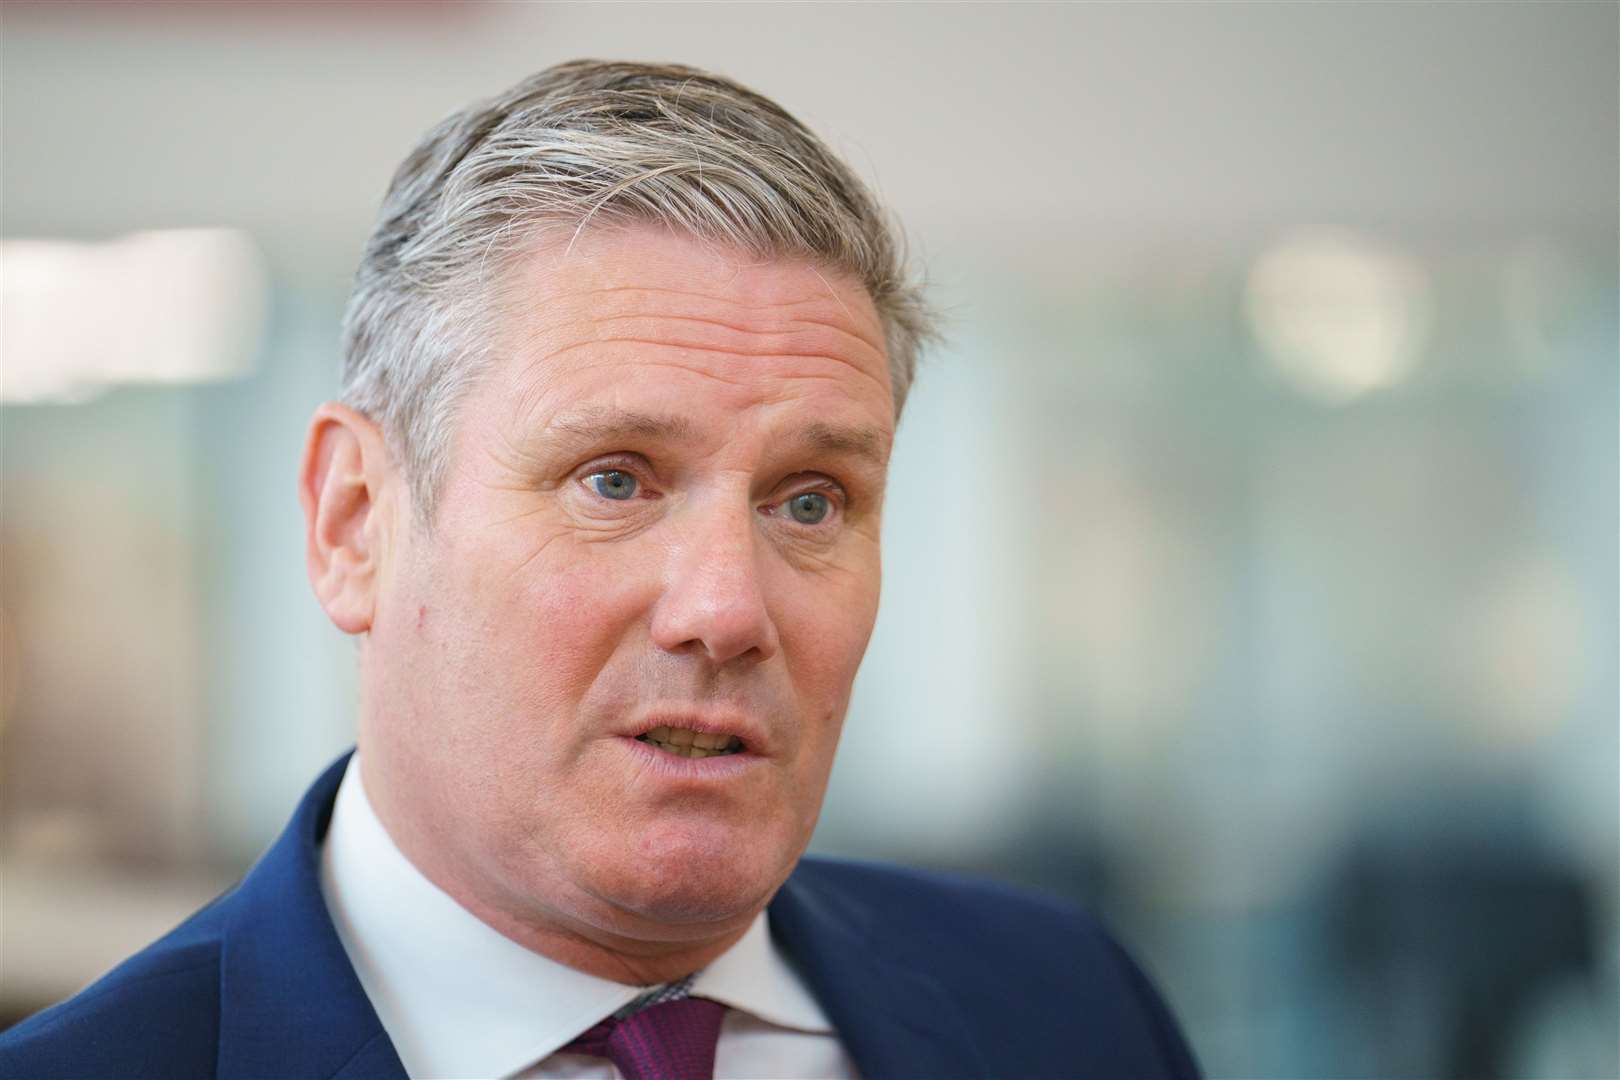 Union leader Mick Lynch said Sir Keir Starmer needed to ‘connect with working-class people’ (Dominic Lipinski/PA)